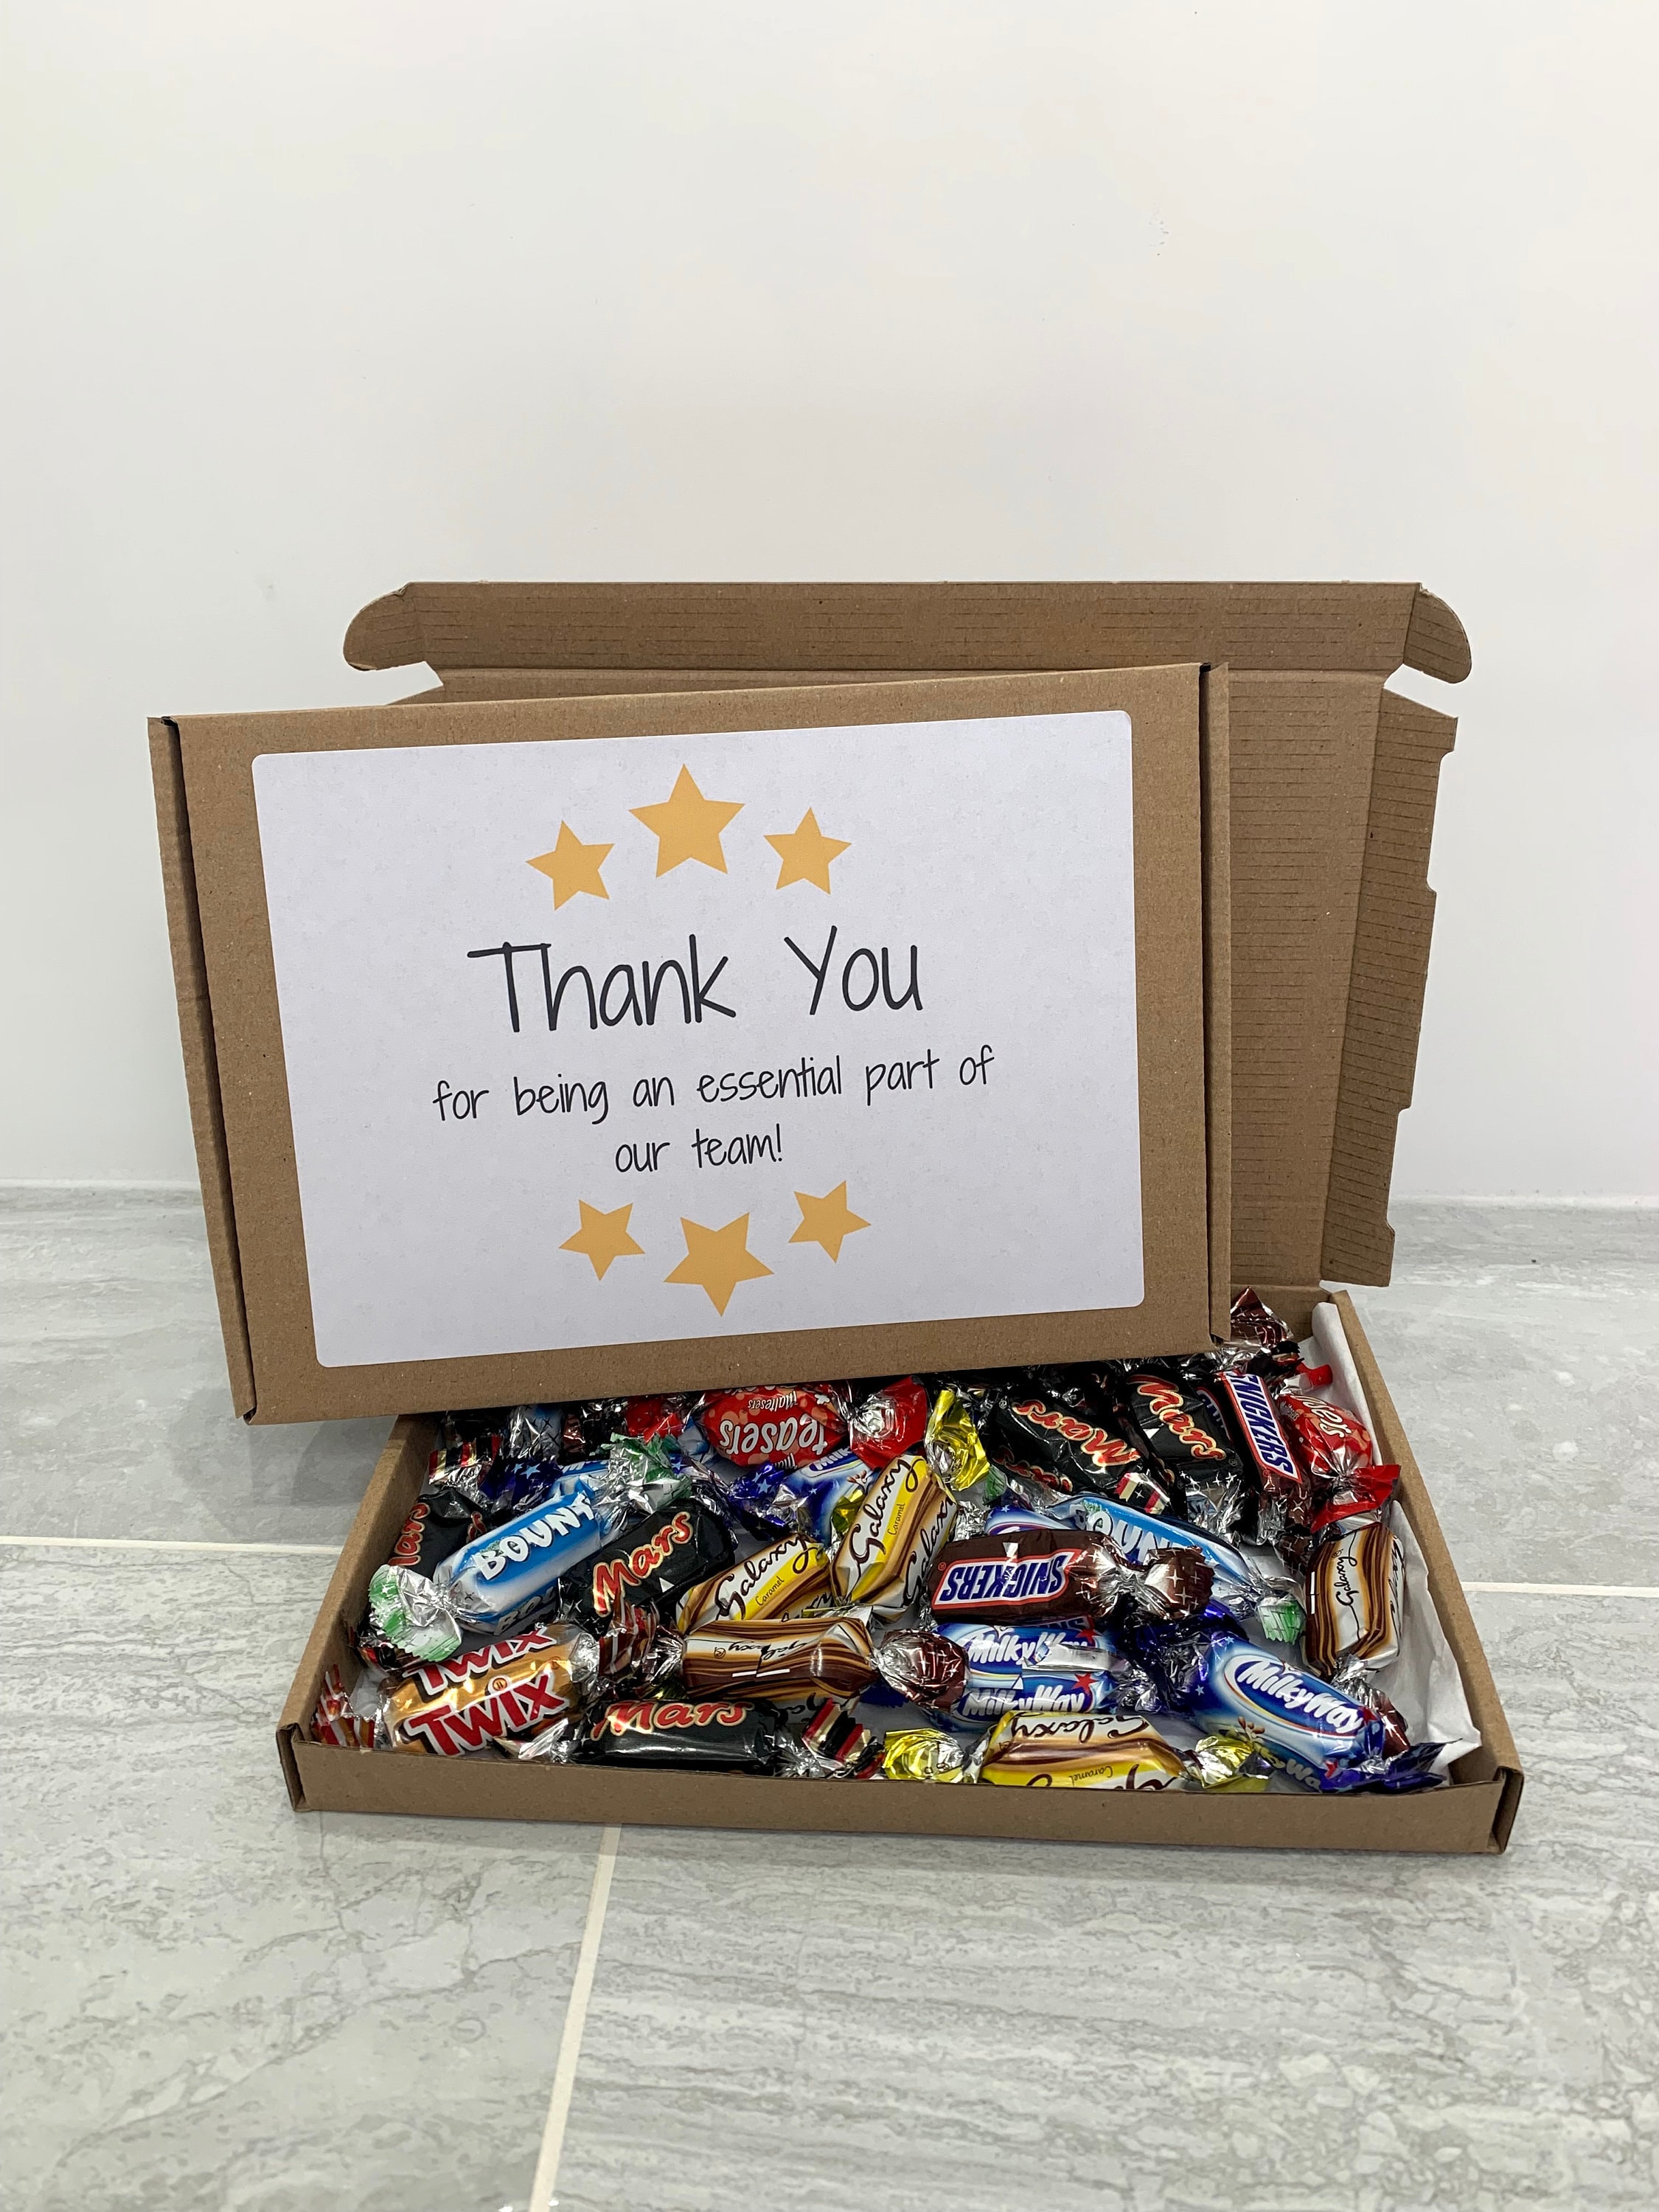 Best Thank You Gifts For Employees - Ebba Neille